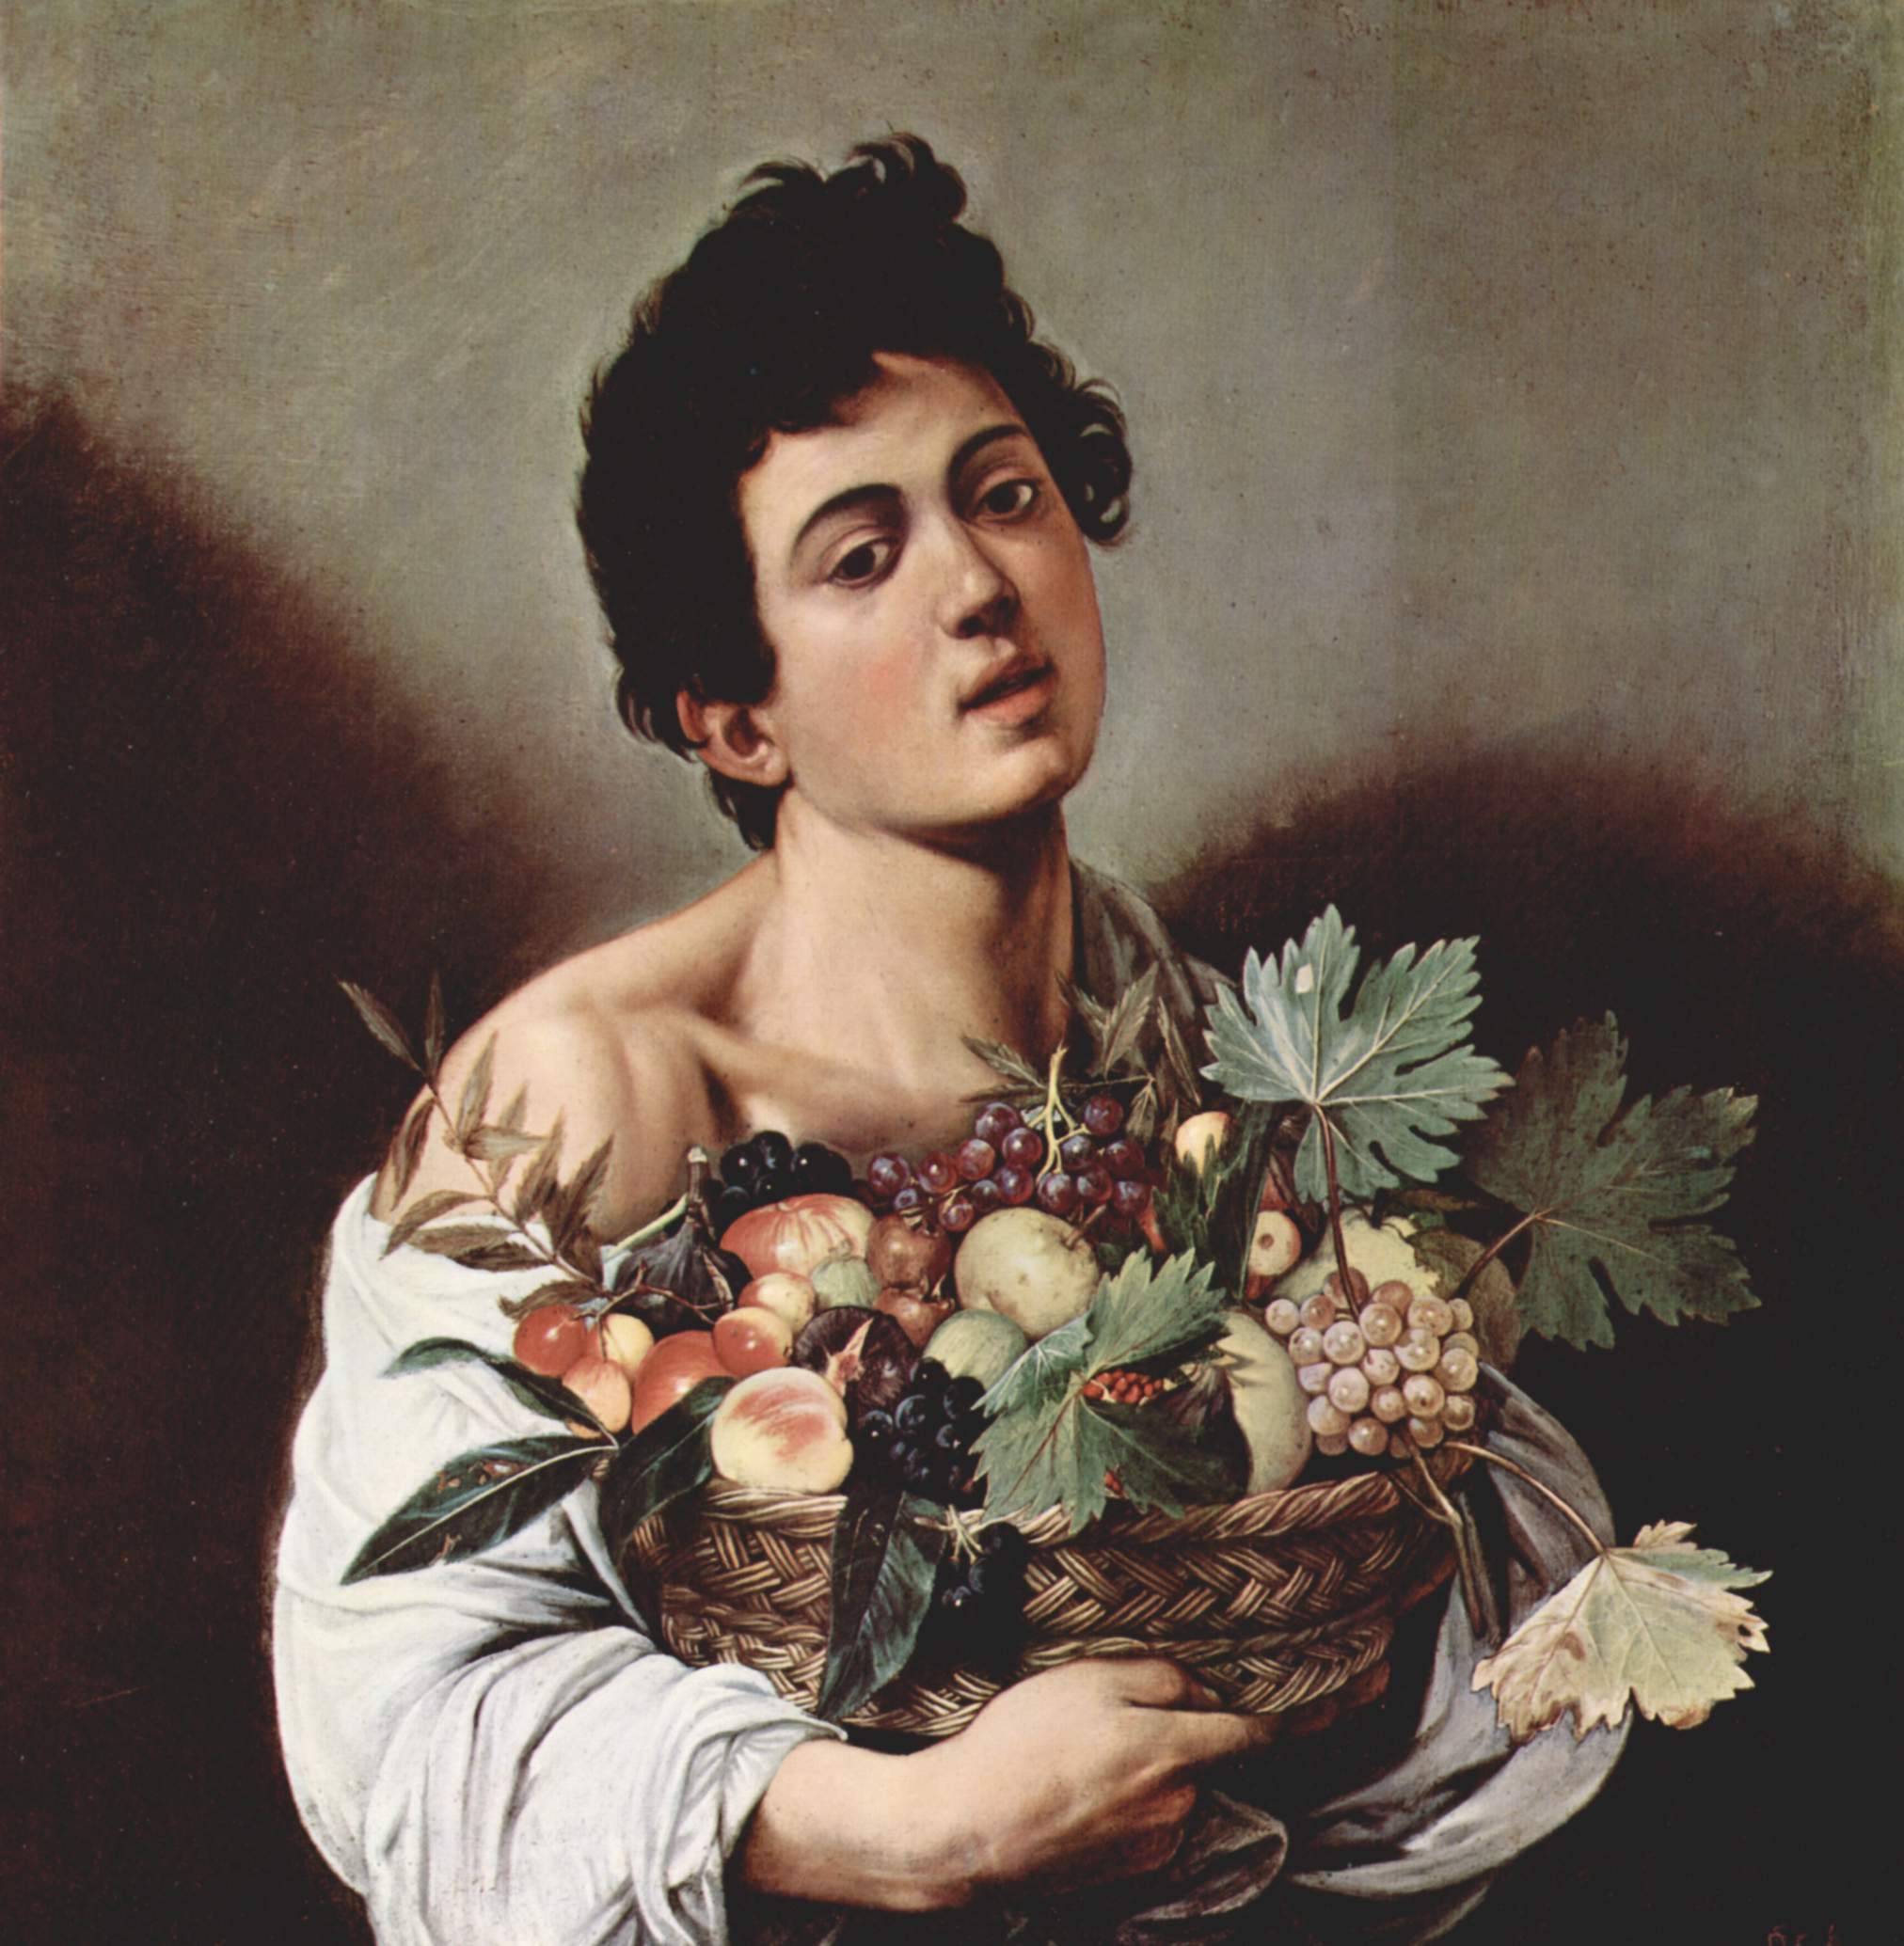 https://buro247.rs/wp-content/uploads/2019/05/michelangelo_caravaggio_10_boy_with_a_basket_of_fruit.jpg